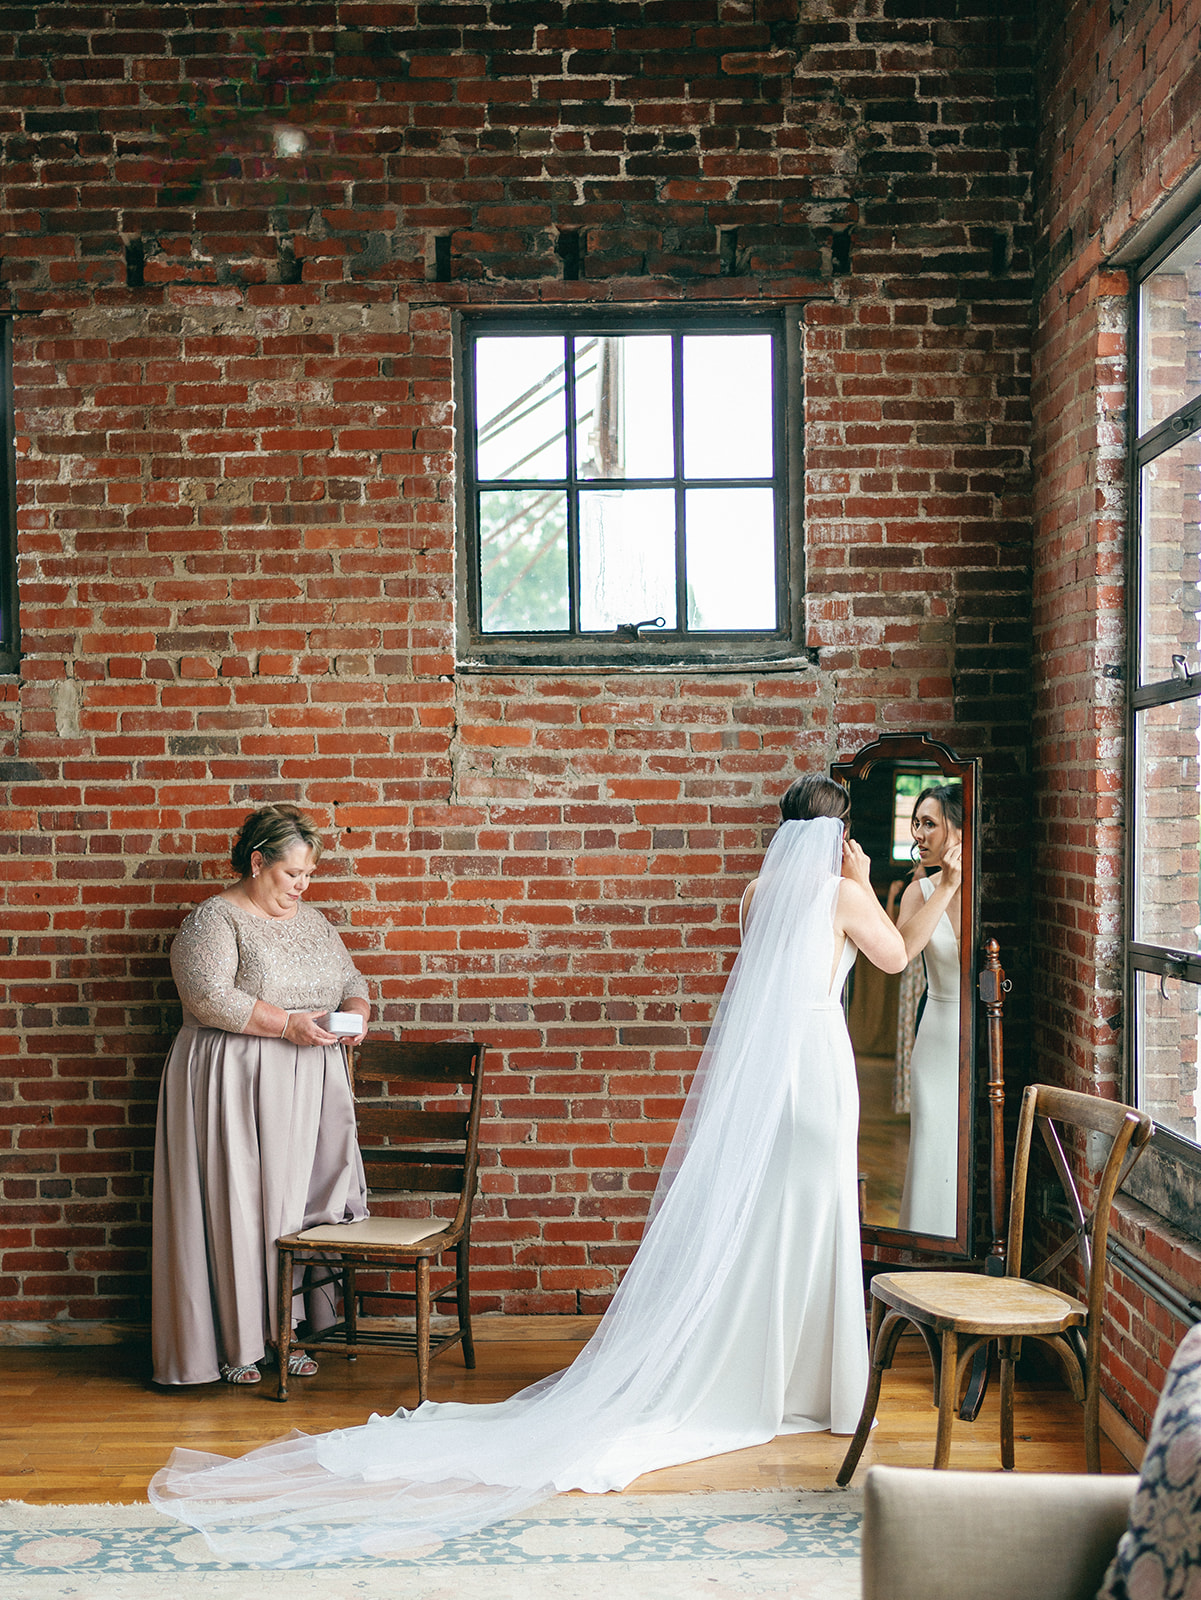 A bride puts on her earrings in a corner mirror in a brick room